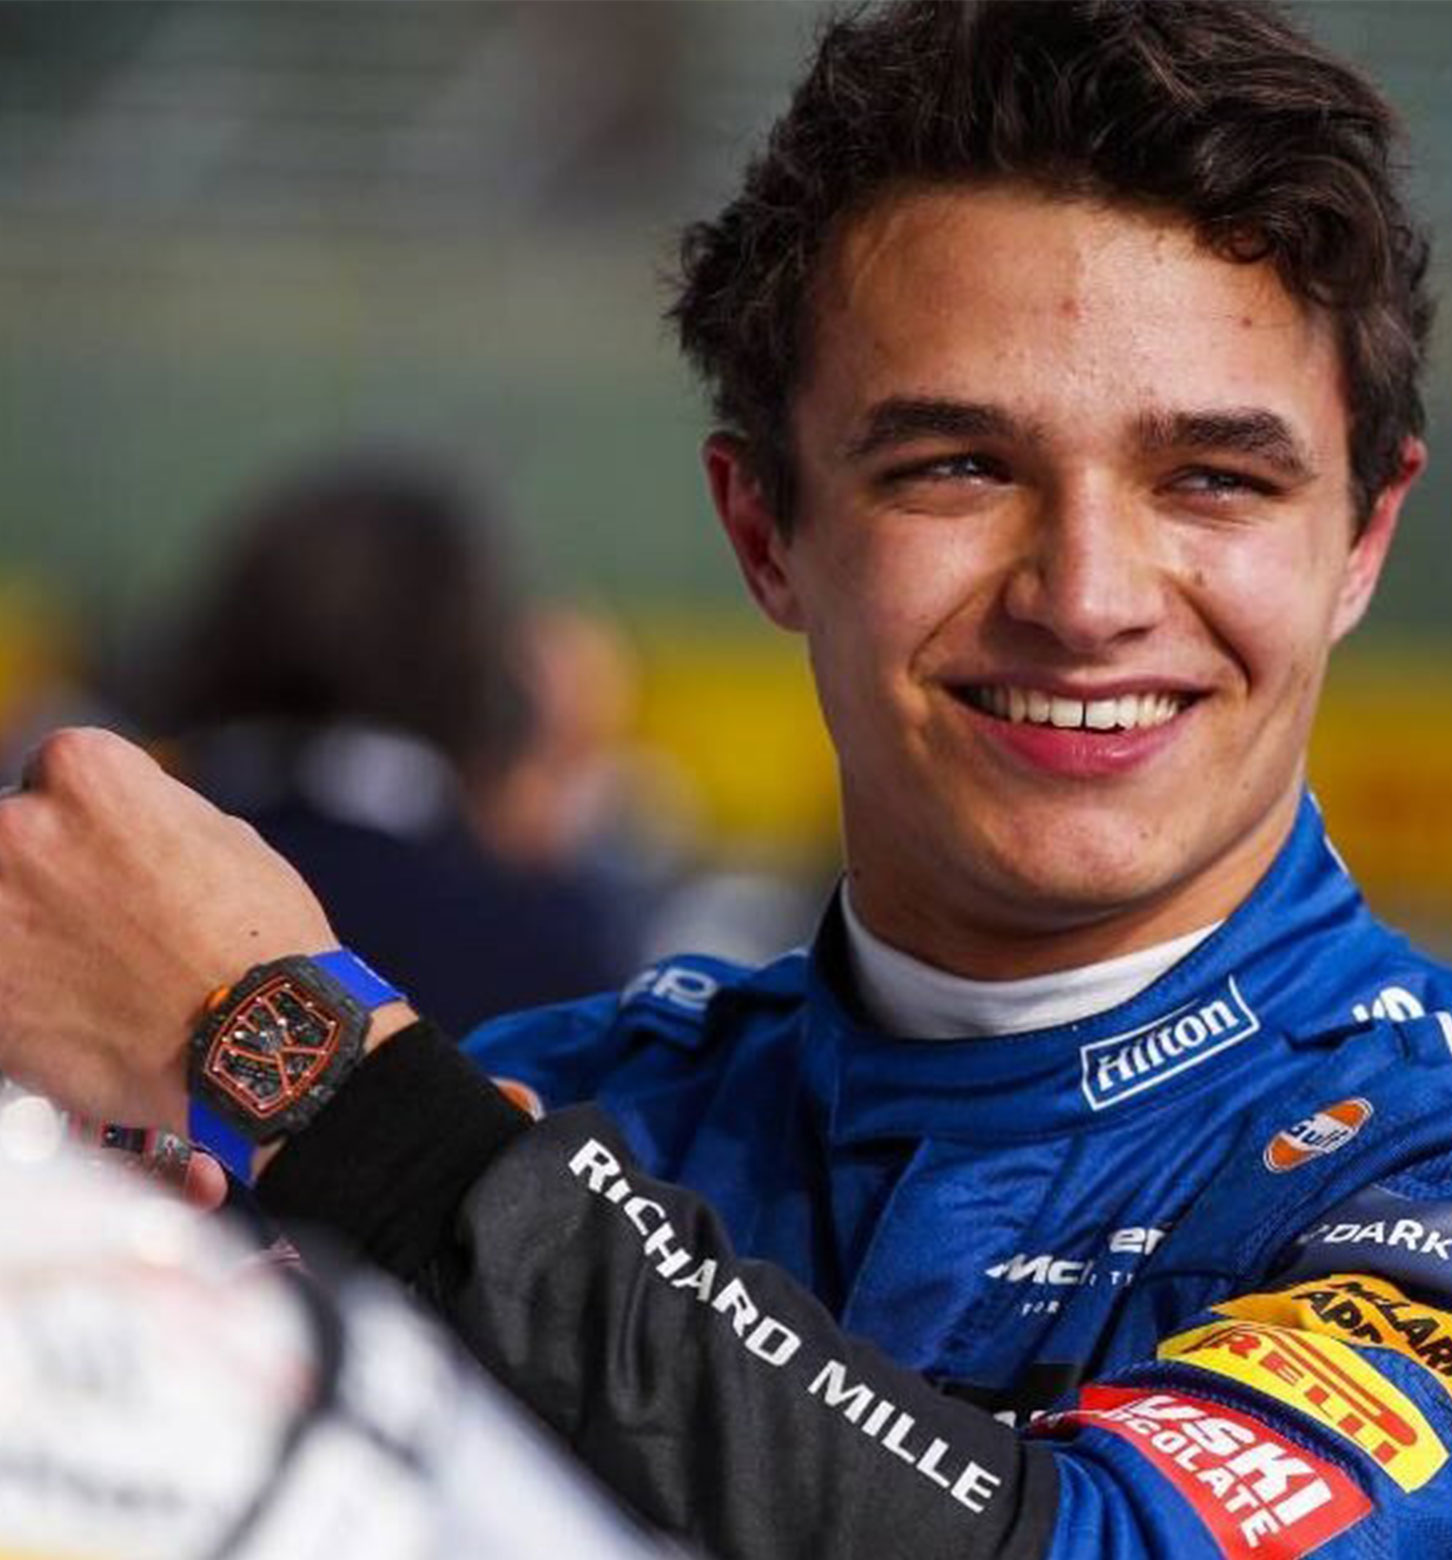 Lando Norris pictured with his custom RM 67-02